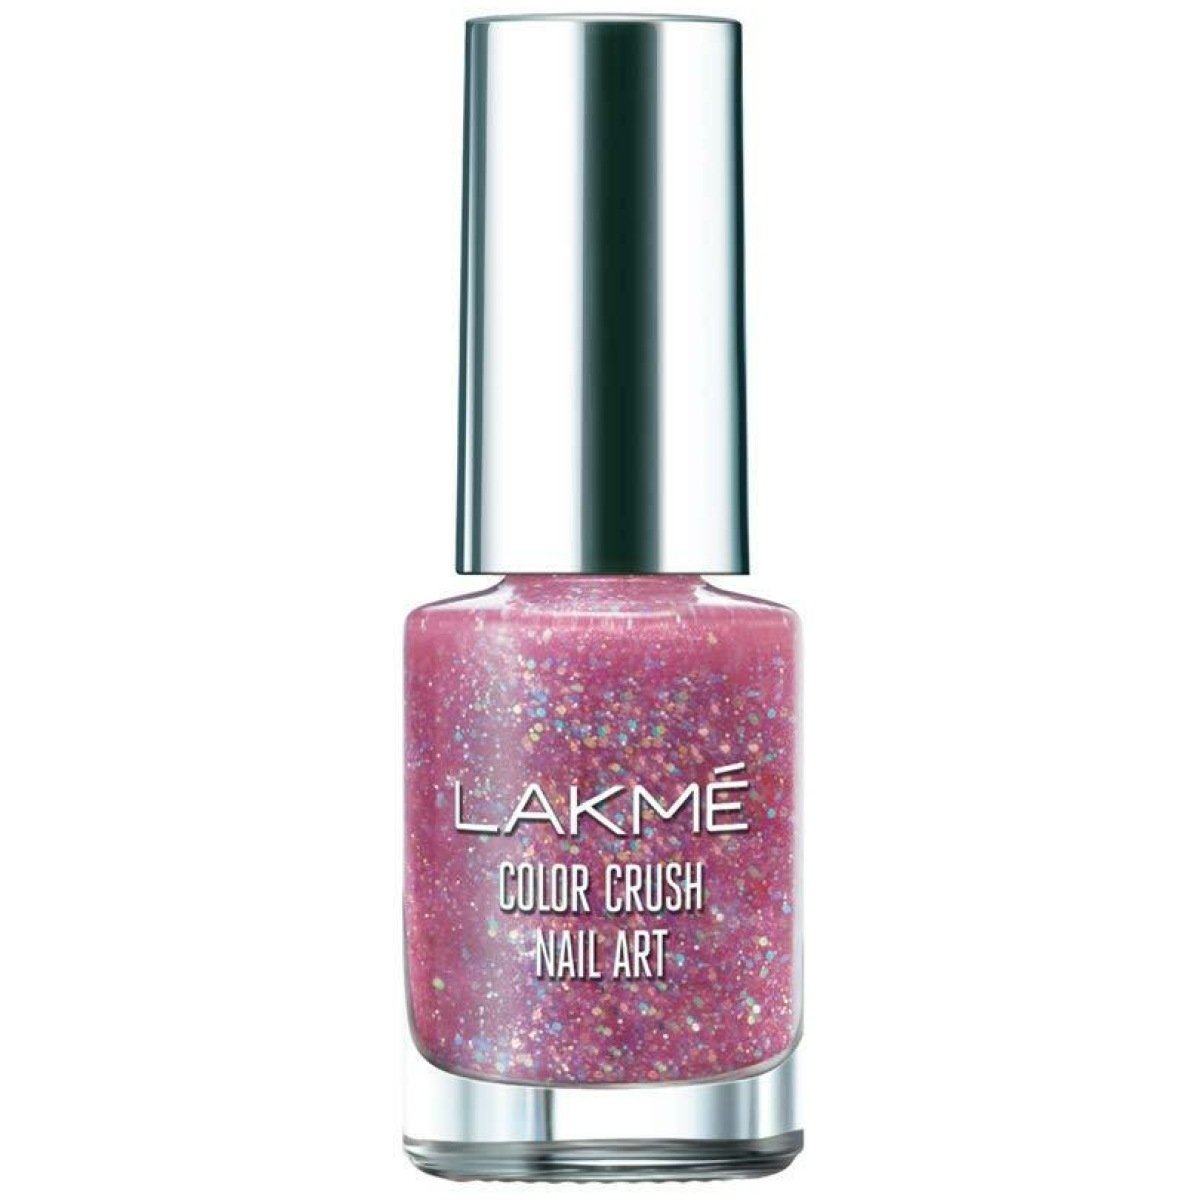 Buy Lakme Color Crush Nailart, M3 Original Nude, 6 ml & Lakme Color Crush  Nailart, M2 Cocoa Nude, 6 ml Online at Low Prices in India - Amazon.in